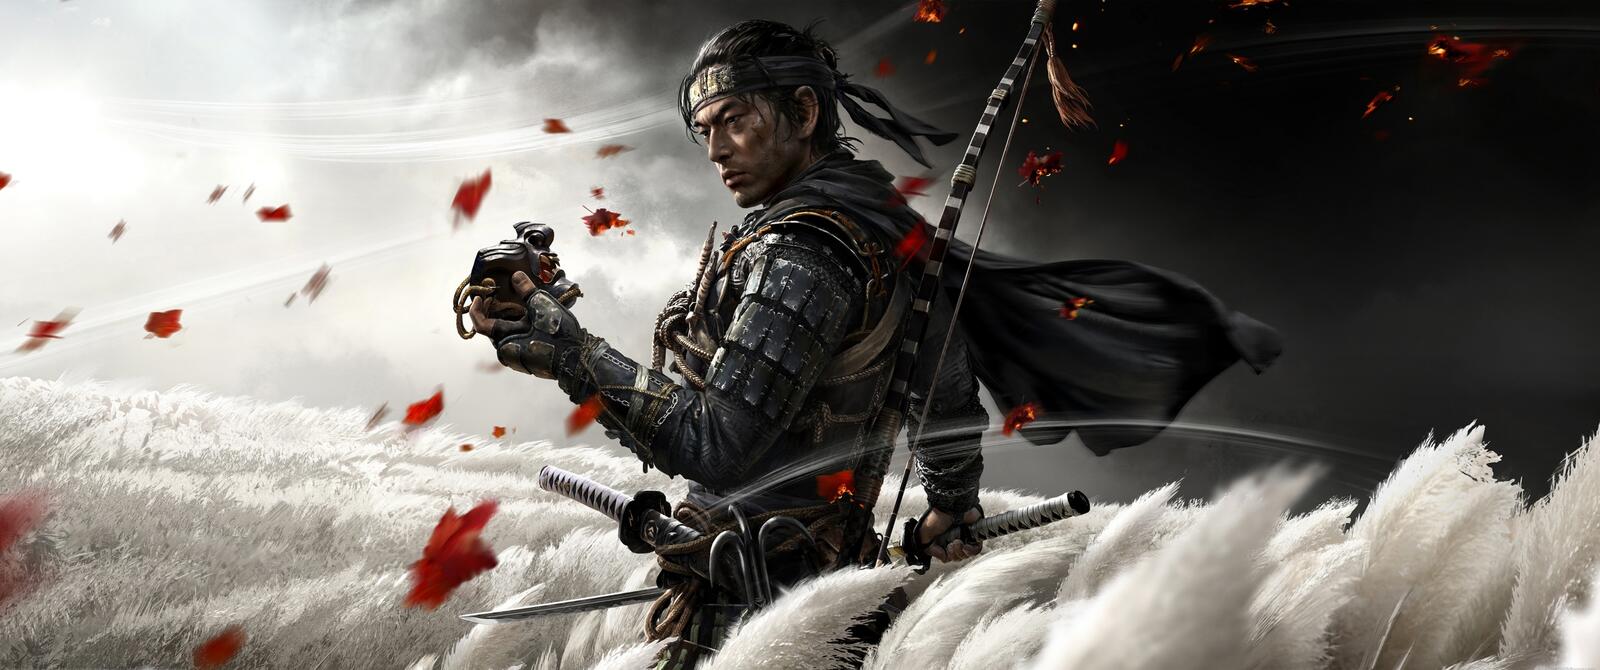 Wallpapers Ghost Of Tsushima games wars on the desktop